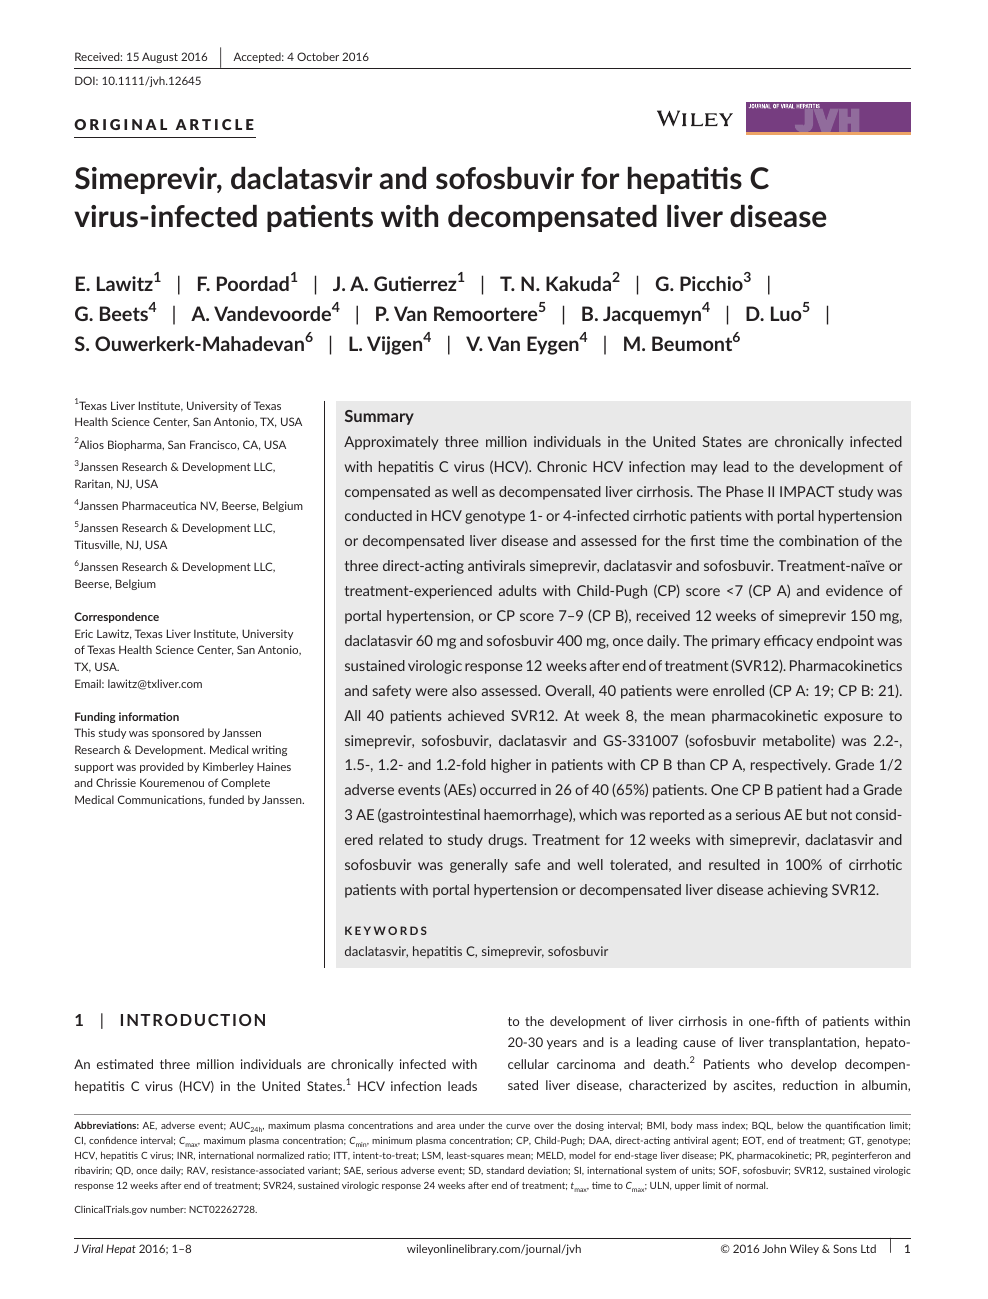 Simeprevir Daclatasvir And Sofosbuvir For Hepatitis C Virus Infected Patients With Decompensated Liver Disease Topic Of Research Paper In Clinical Medicine Download Scholarly Article Pdf And Read For Free On Cyberleninka Open